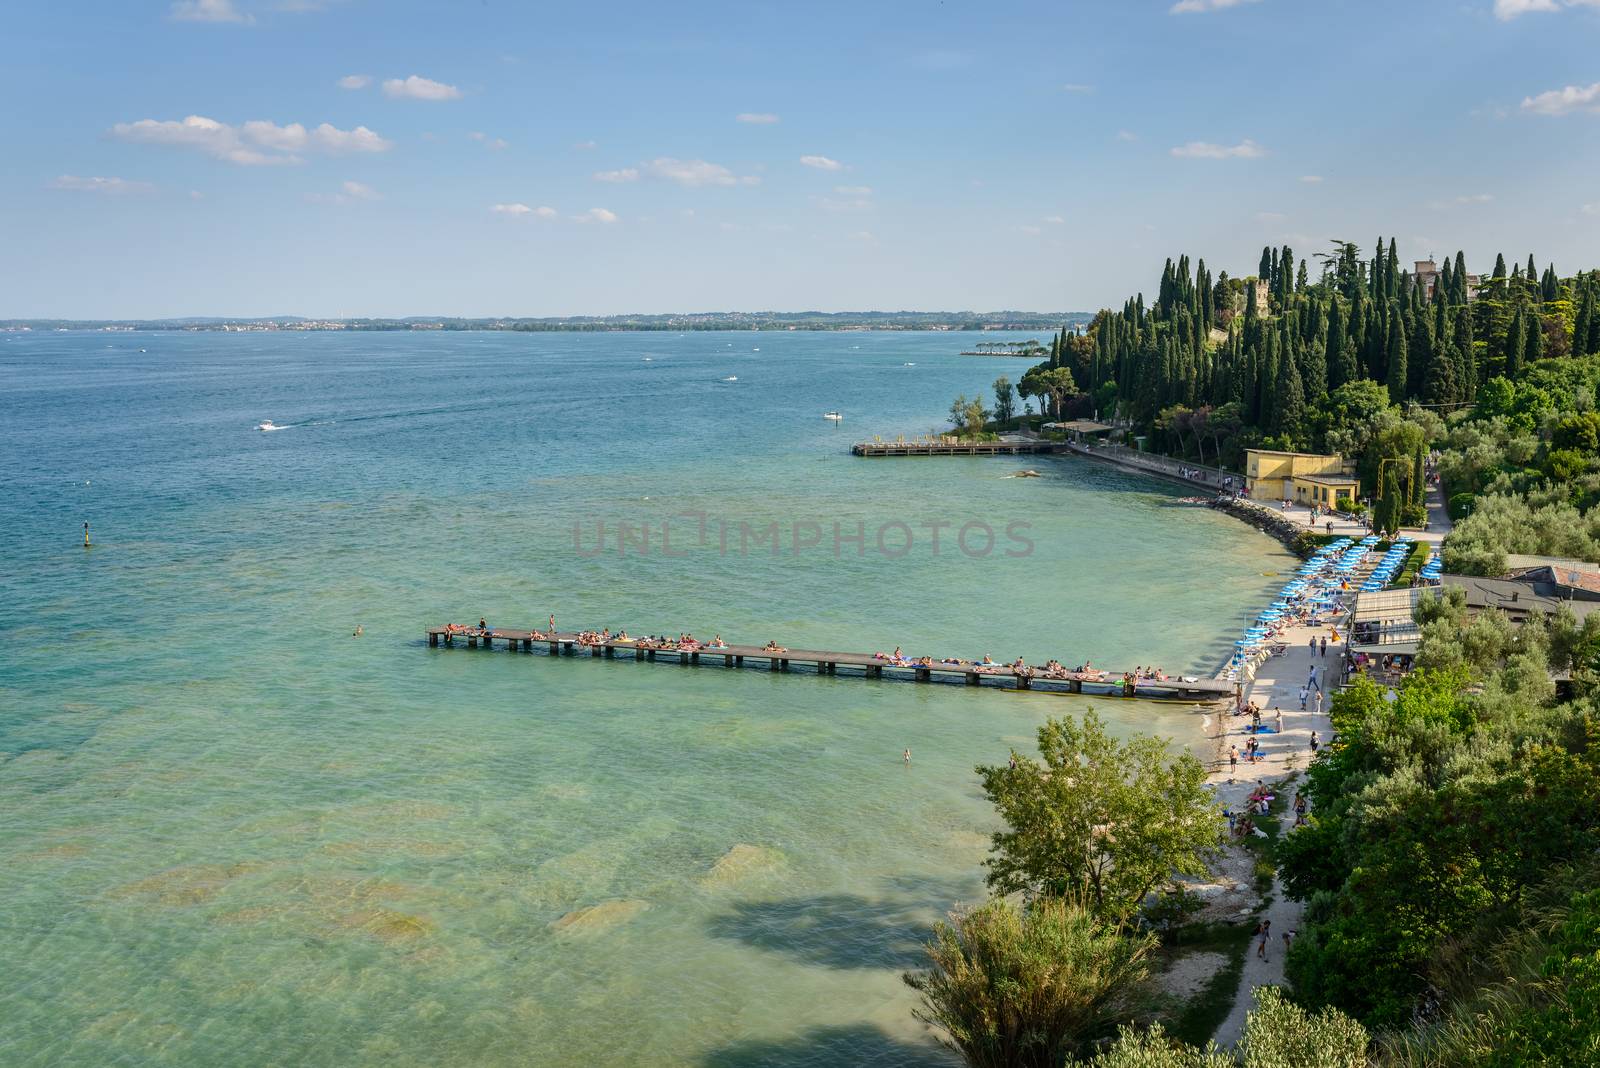 A view of Garda Lake from the caves of Catullus